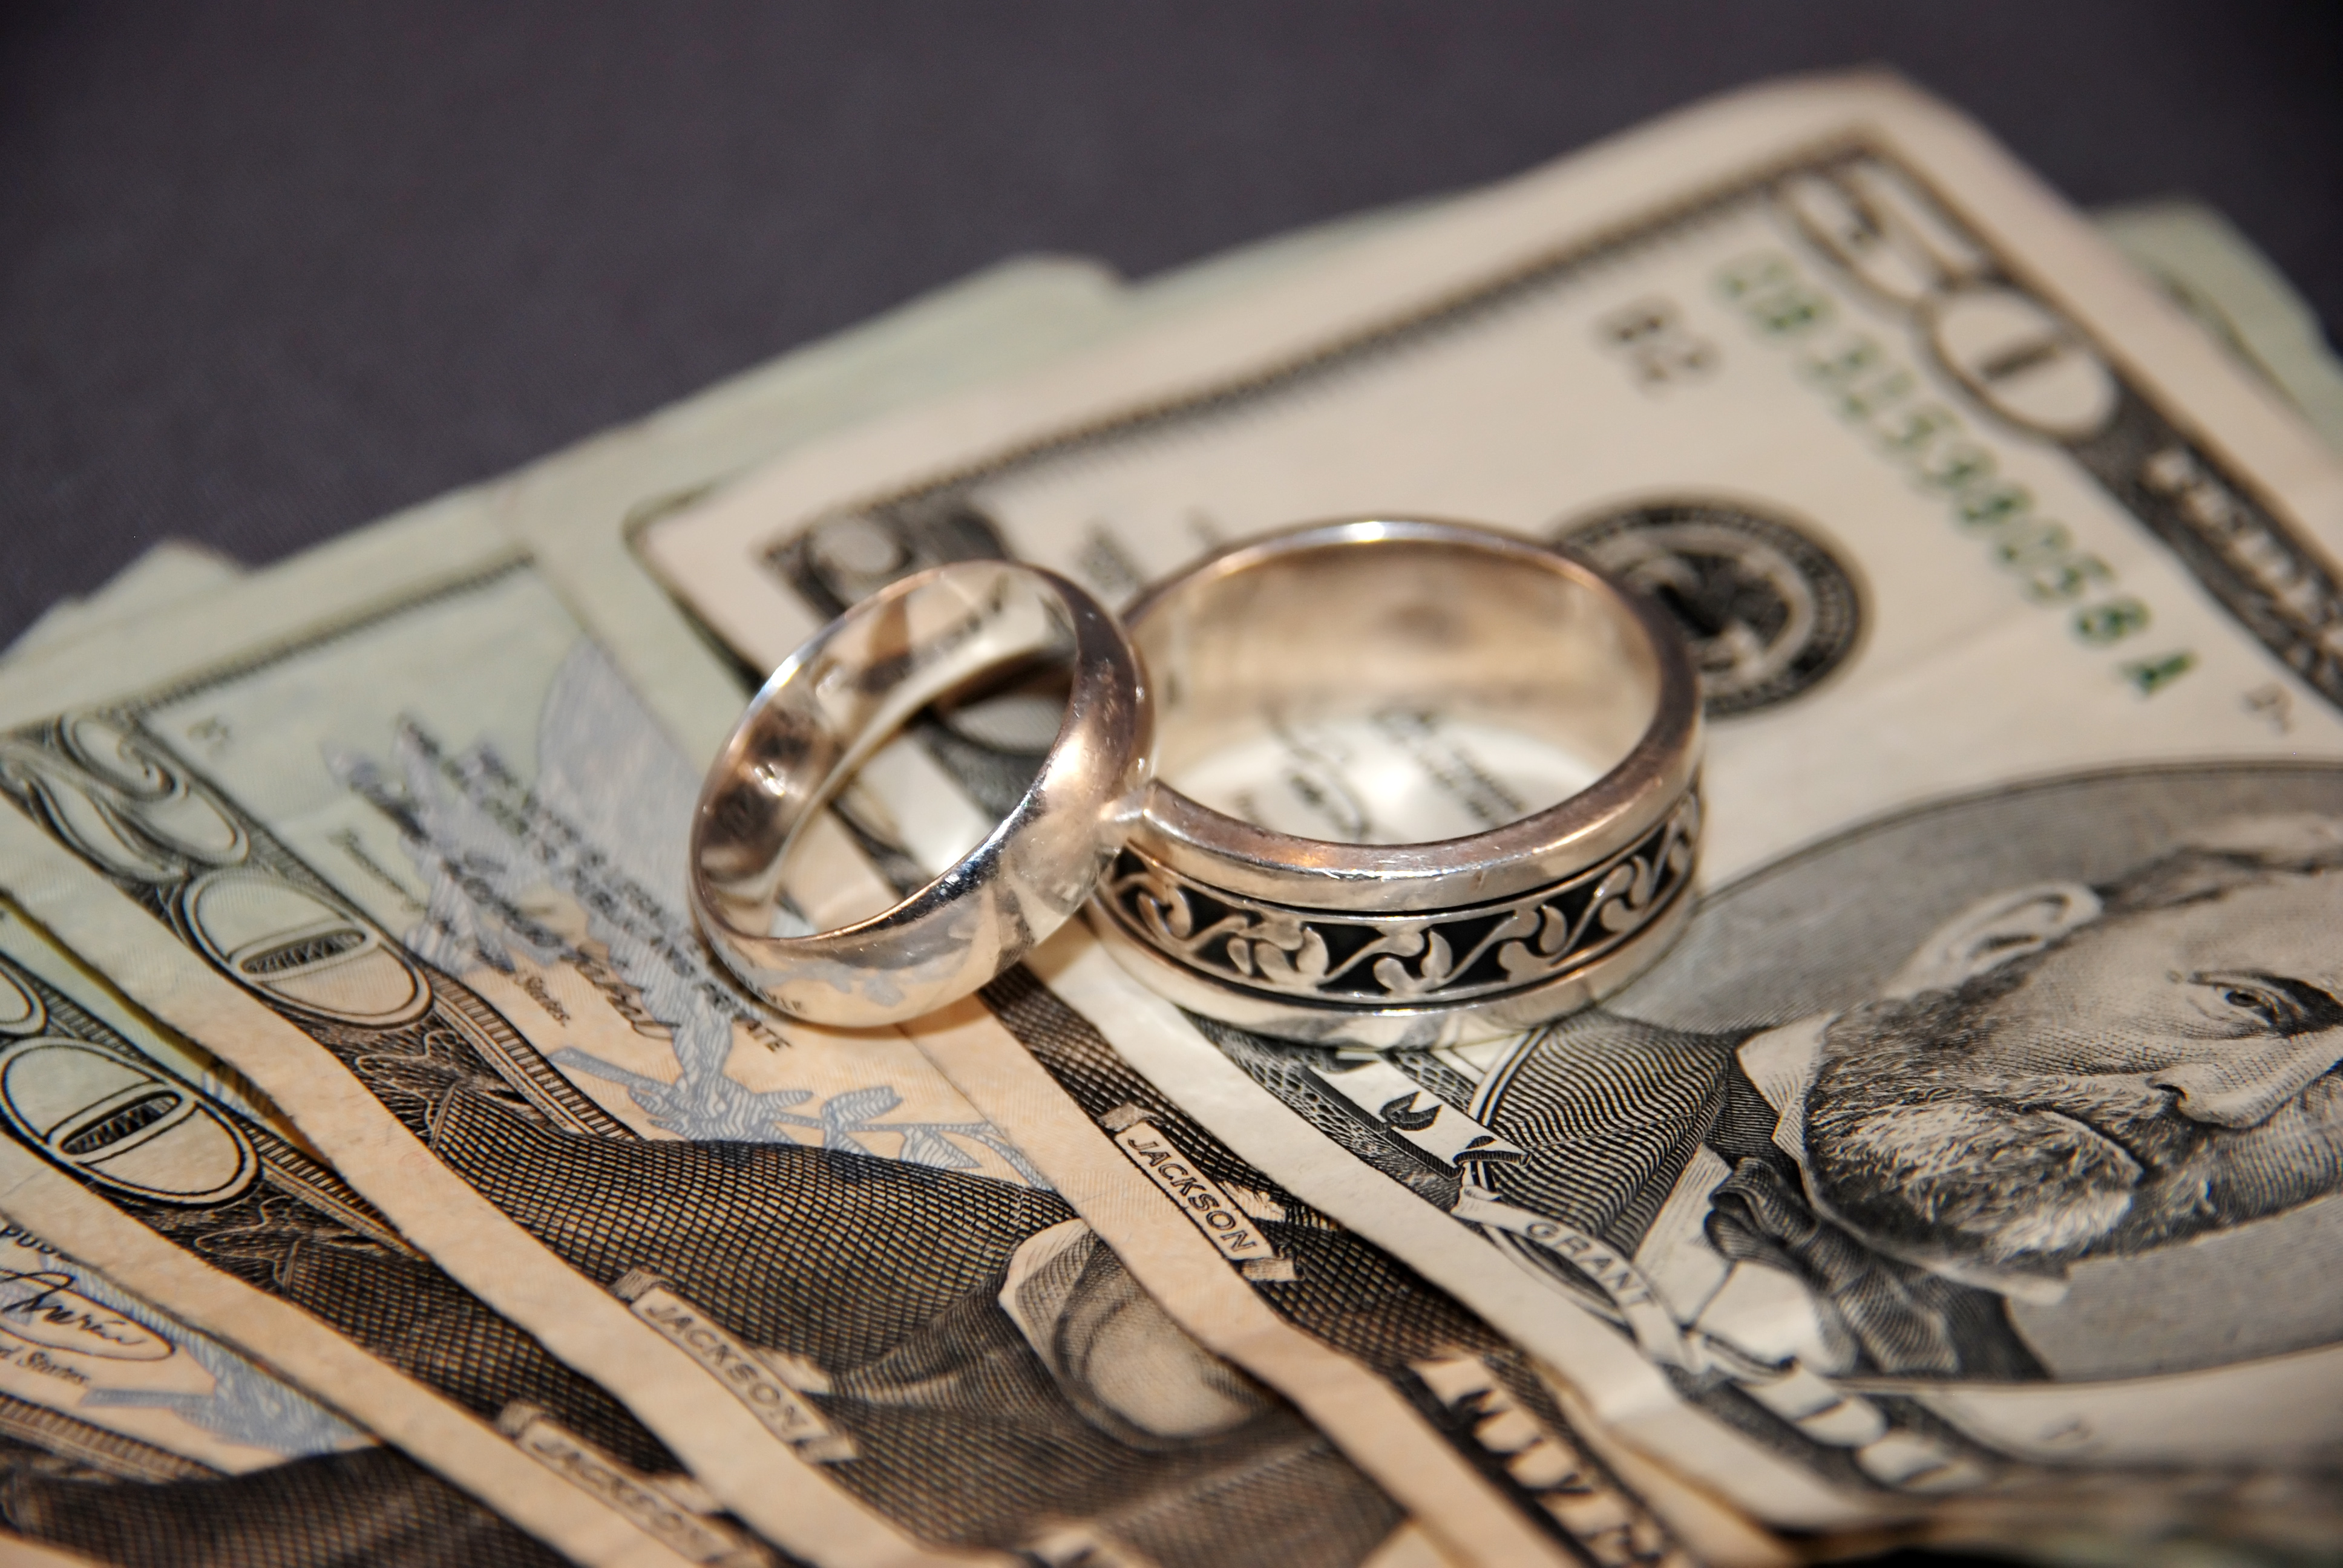 Marriage and Money